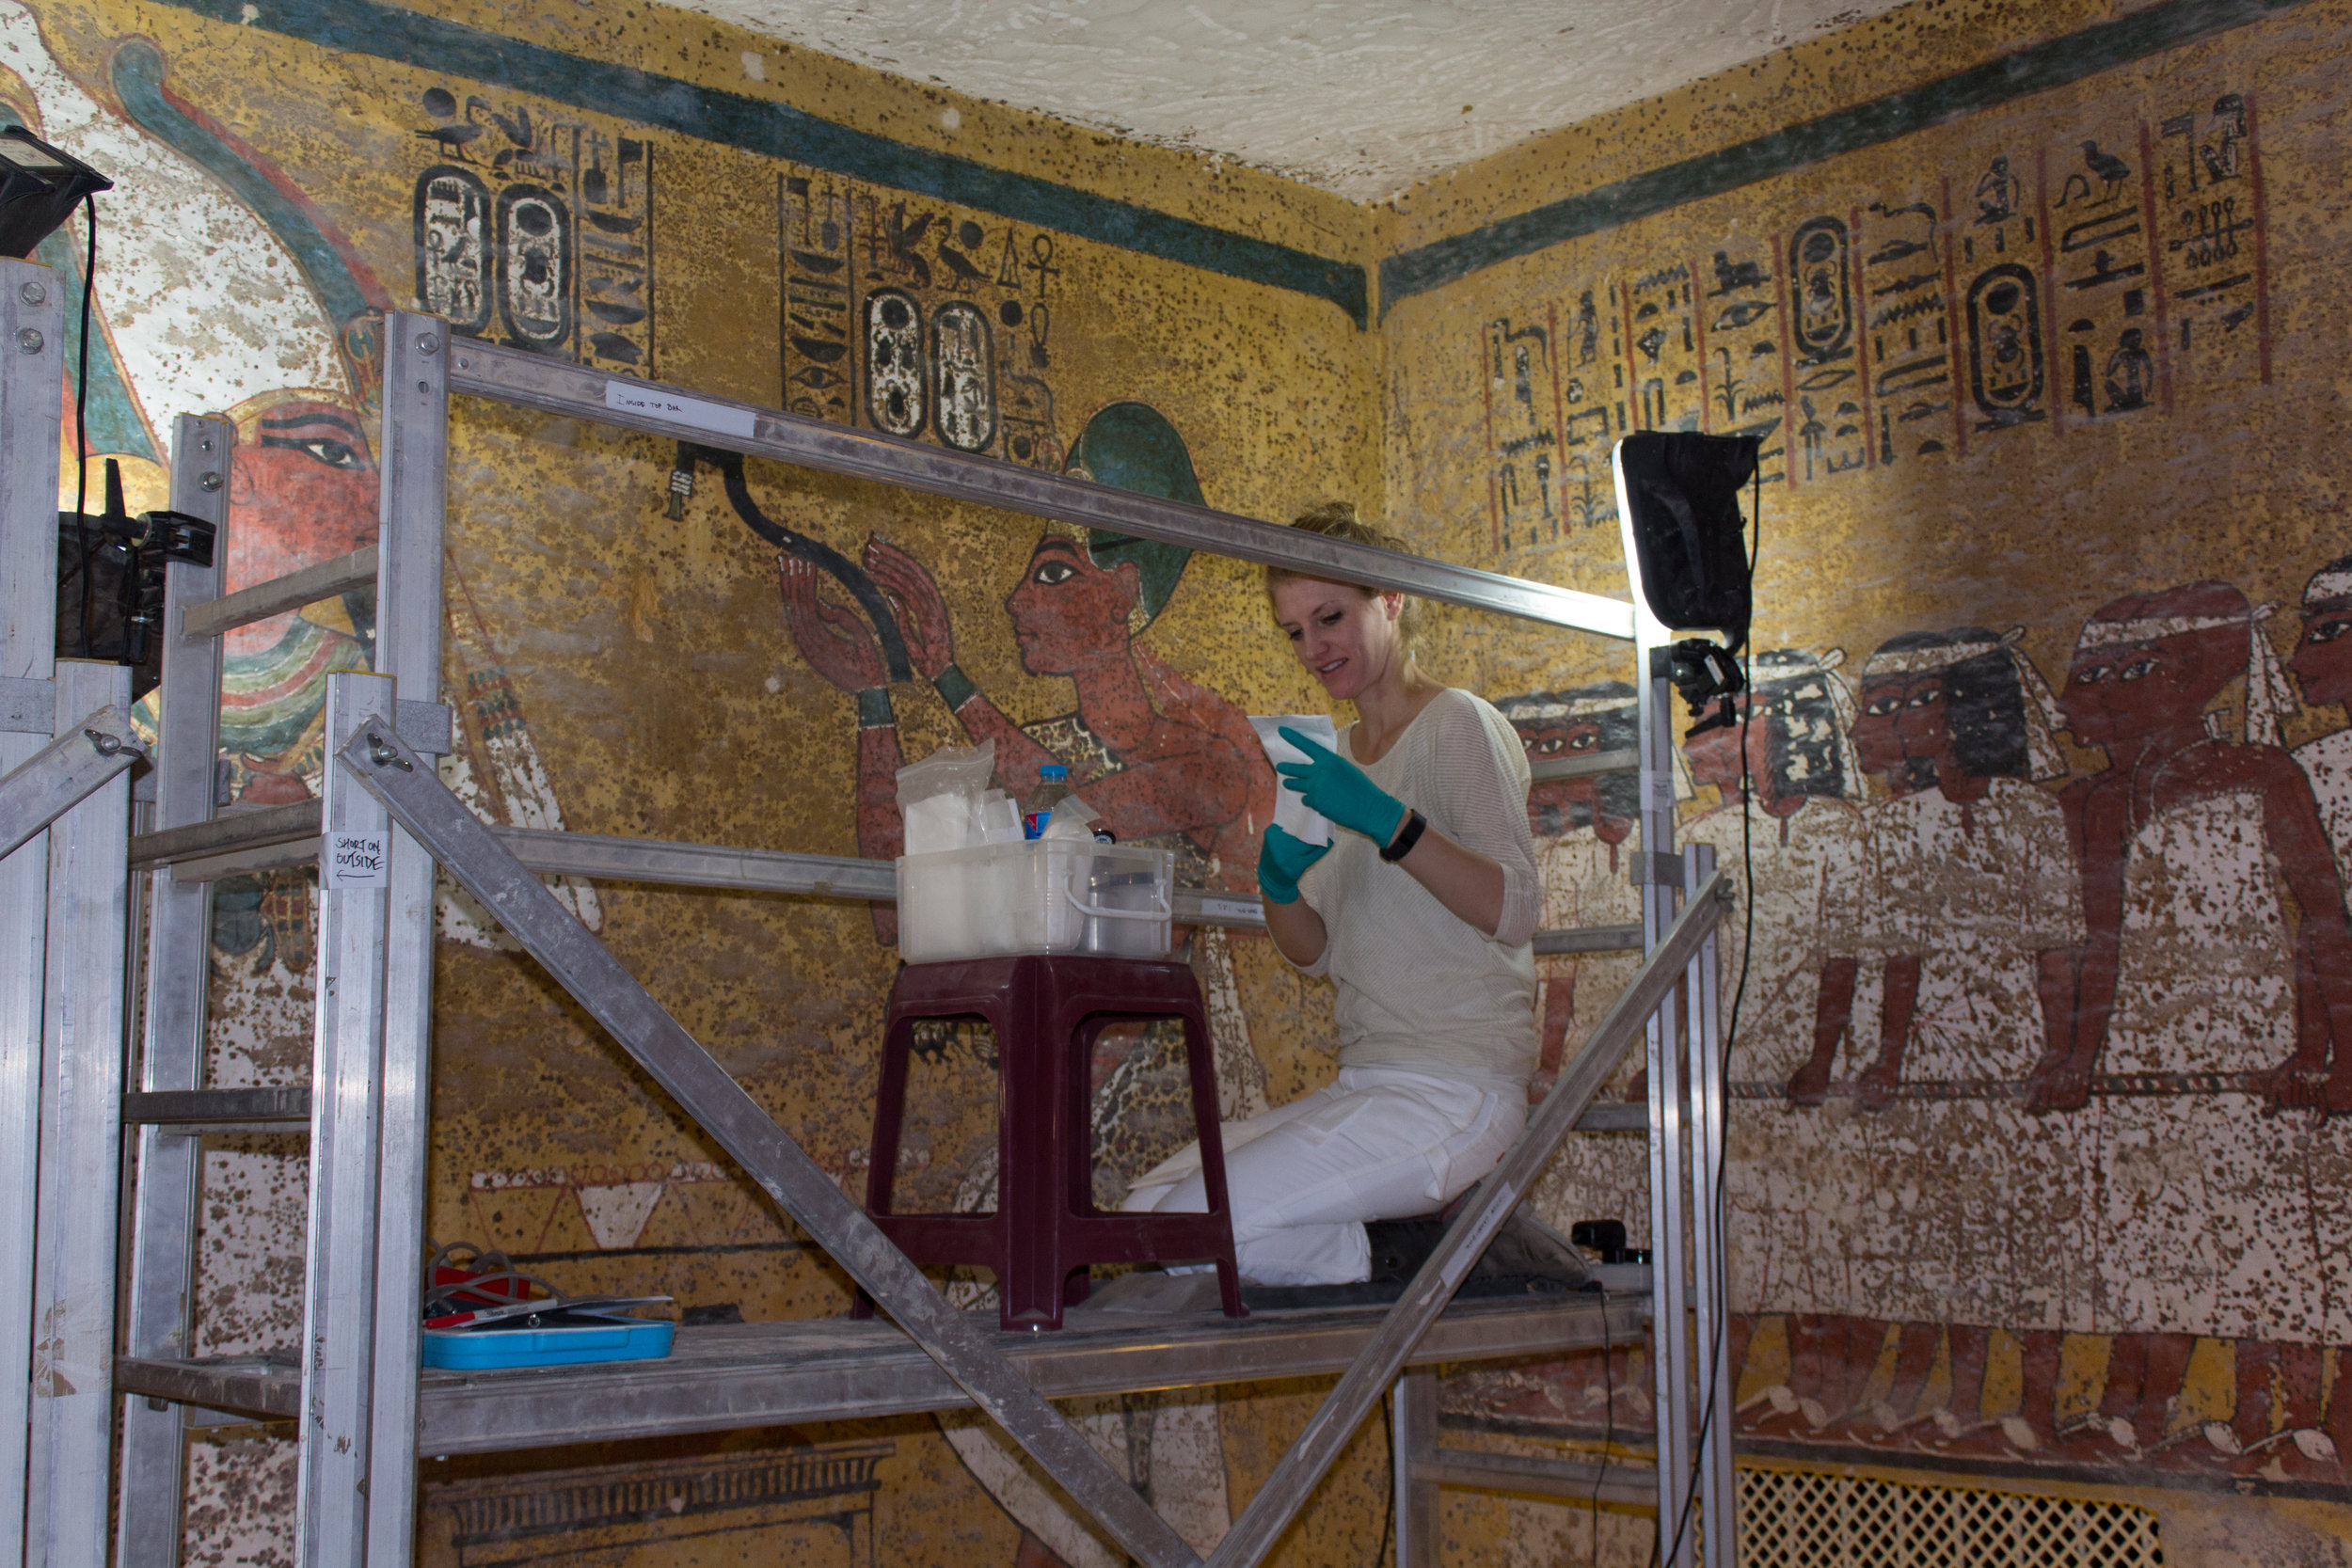  Preparing for removal of dust from the wall paintings.&nbsp;  Image © J. Paul Getty Trust, 2016 